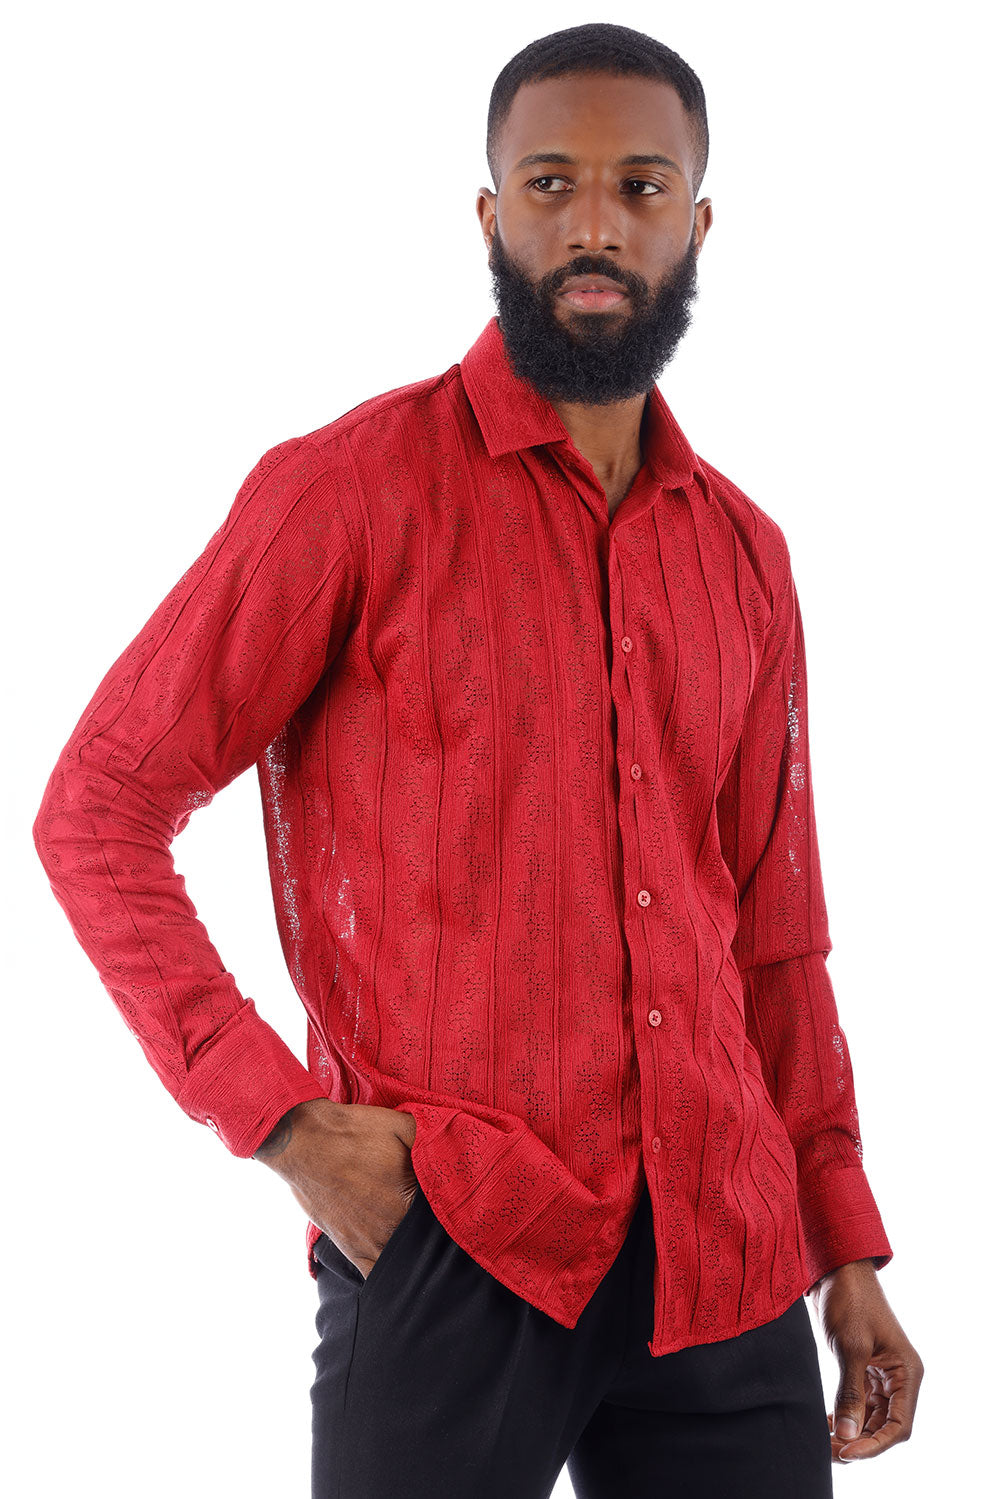 BARABAS Men's Floral Knitted Button Down Long Sleeve Shirt 4B44 Red